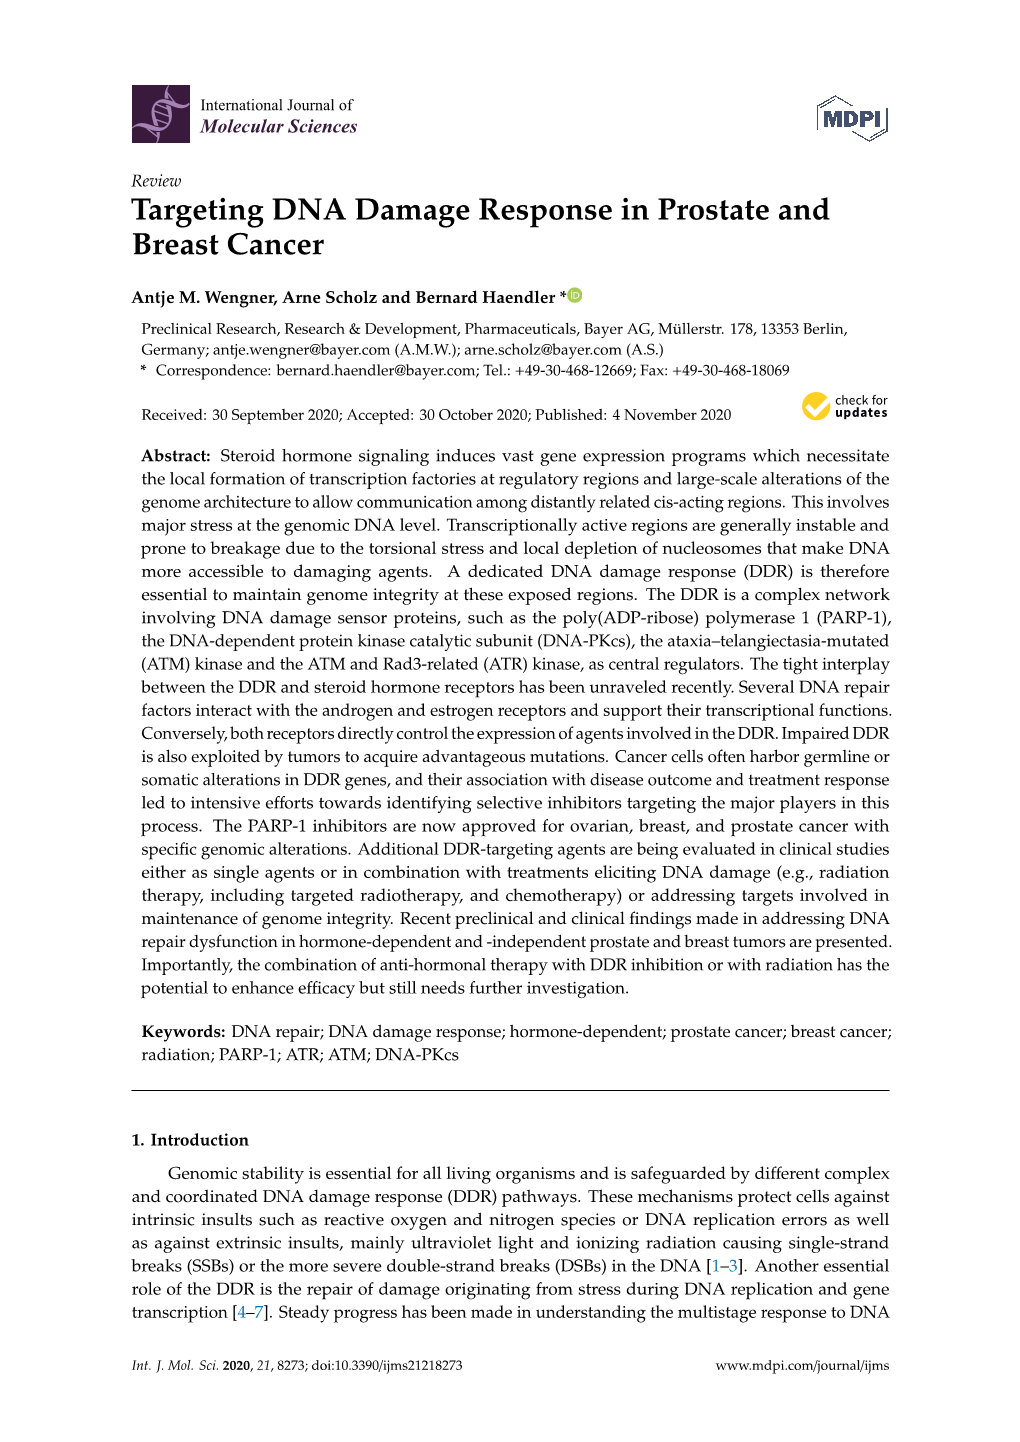 Targeting DNA Damage Response in Prostate and Breast Cancer